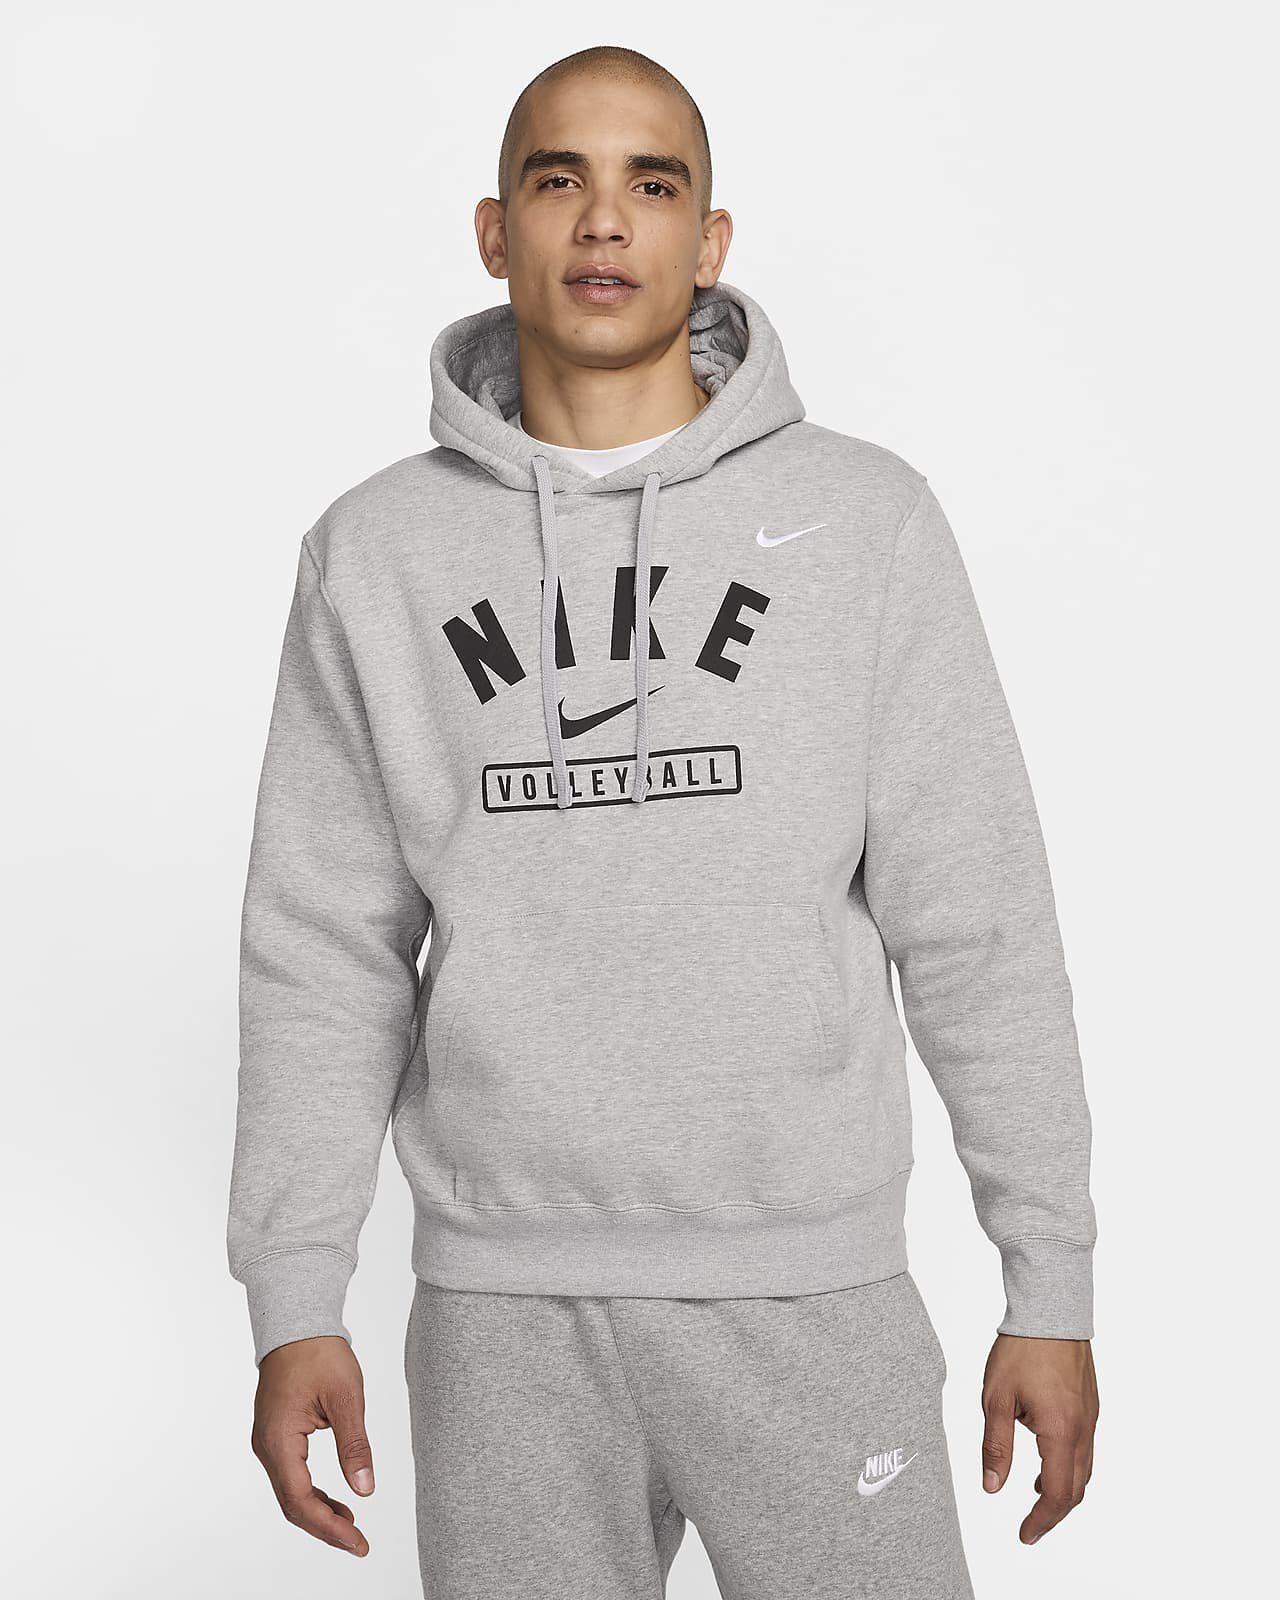 Nike Men's Volleyball Pullover Hoodie